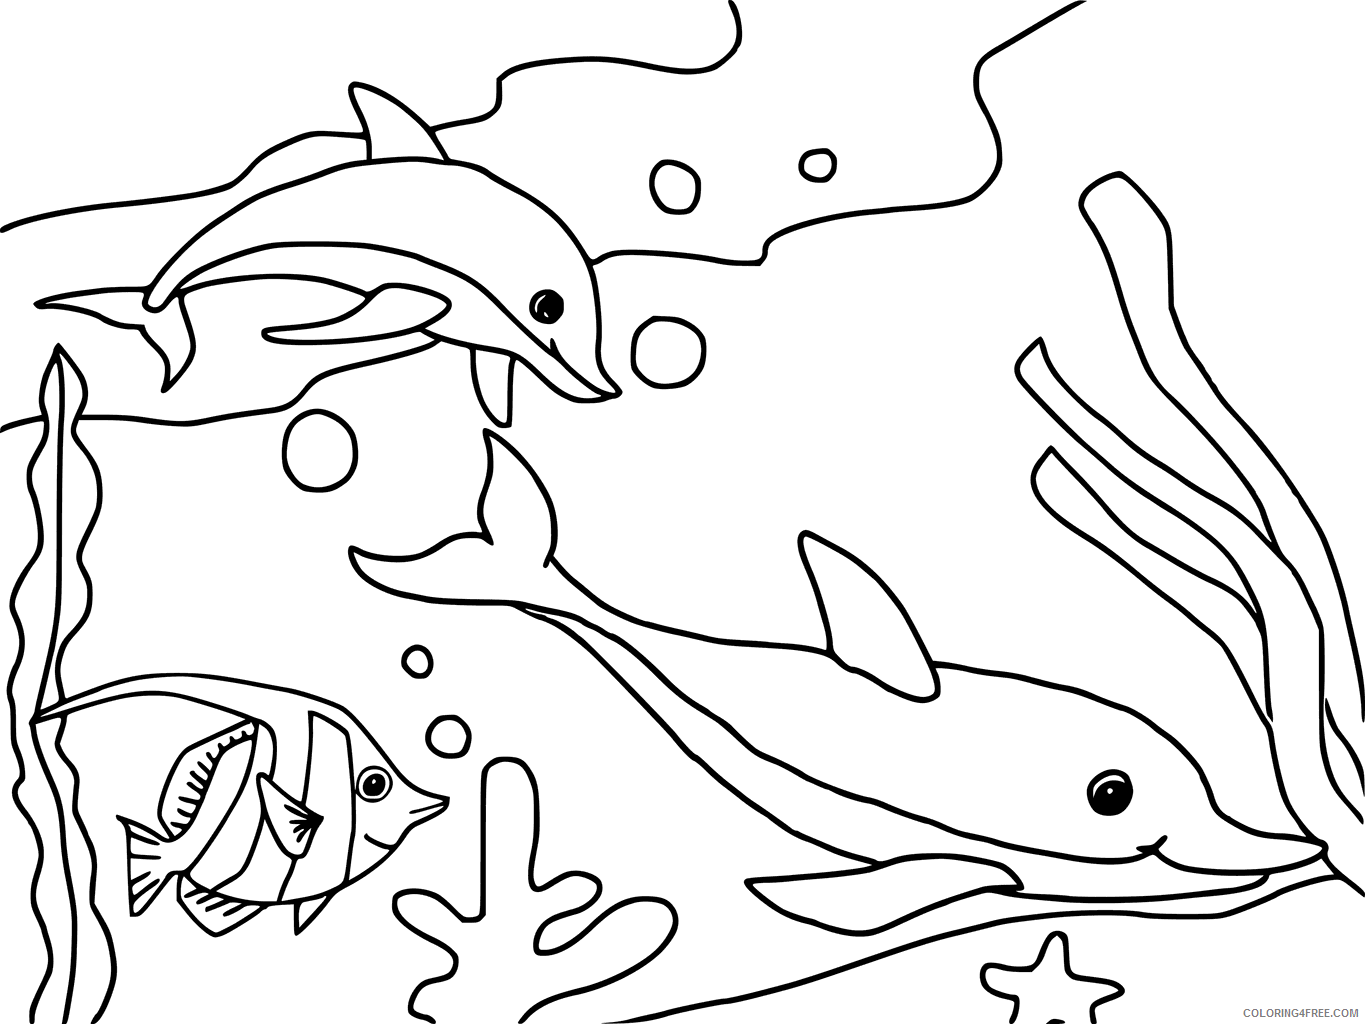 Dolphin Coloring Pages Animal Printable Sheets Dolphins in the Ocean 2021 1660 Coloring4free